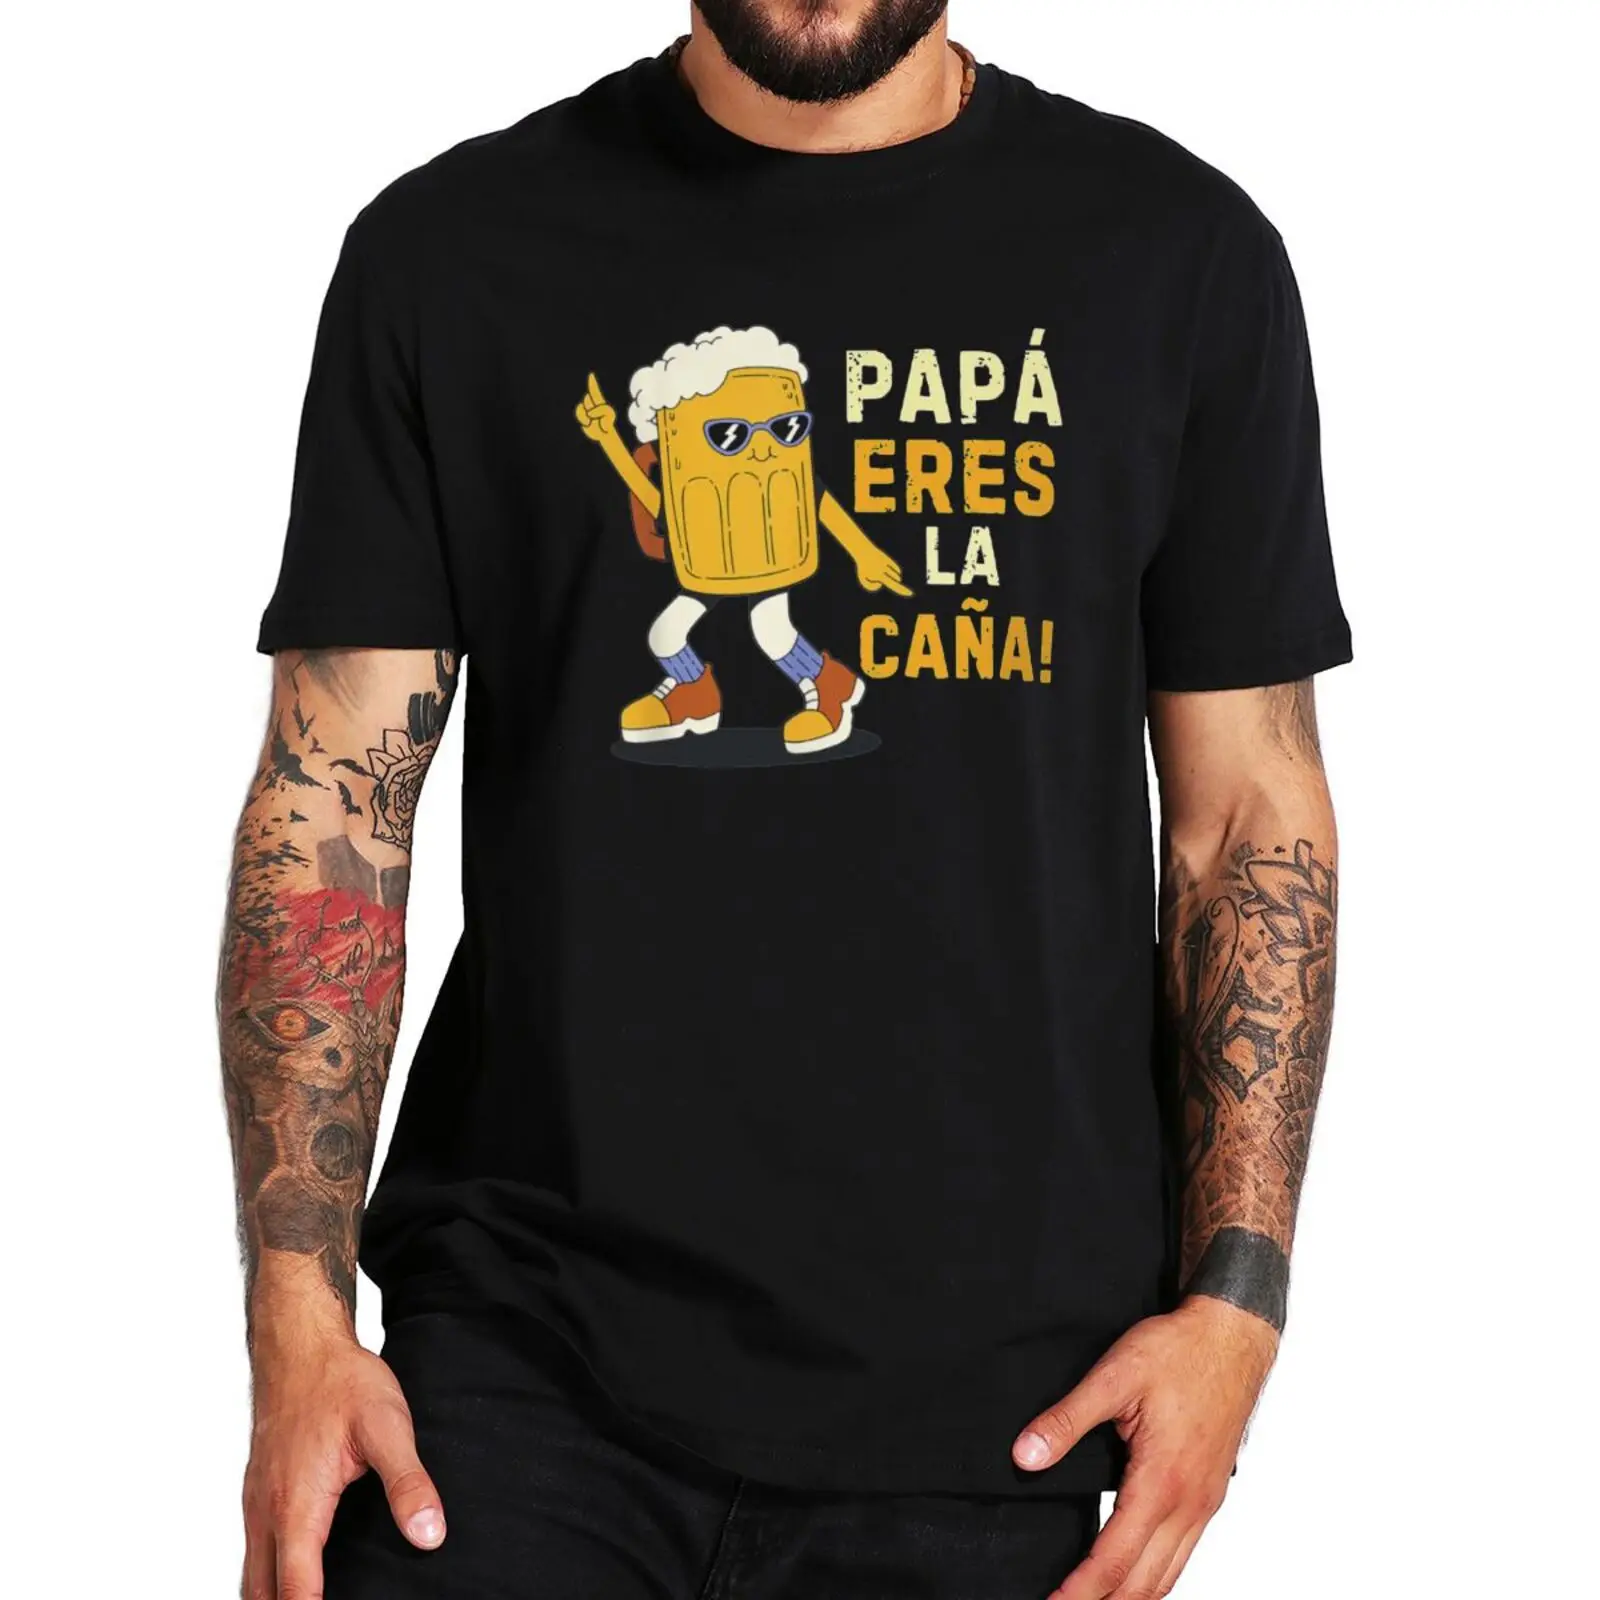 

Dad You're Great T Shirt Retro Spanish Papa Father's Day Birthday Gift T-shirt Casual 100% Cotton Soft Unisex Tee Tops EU Size